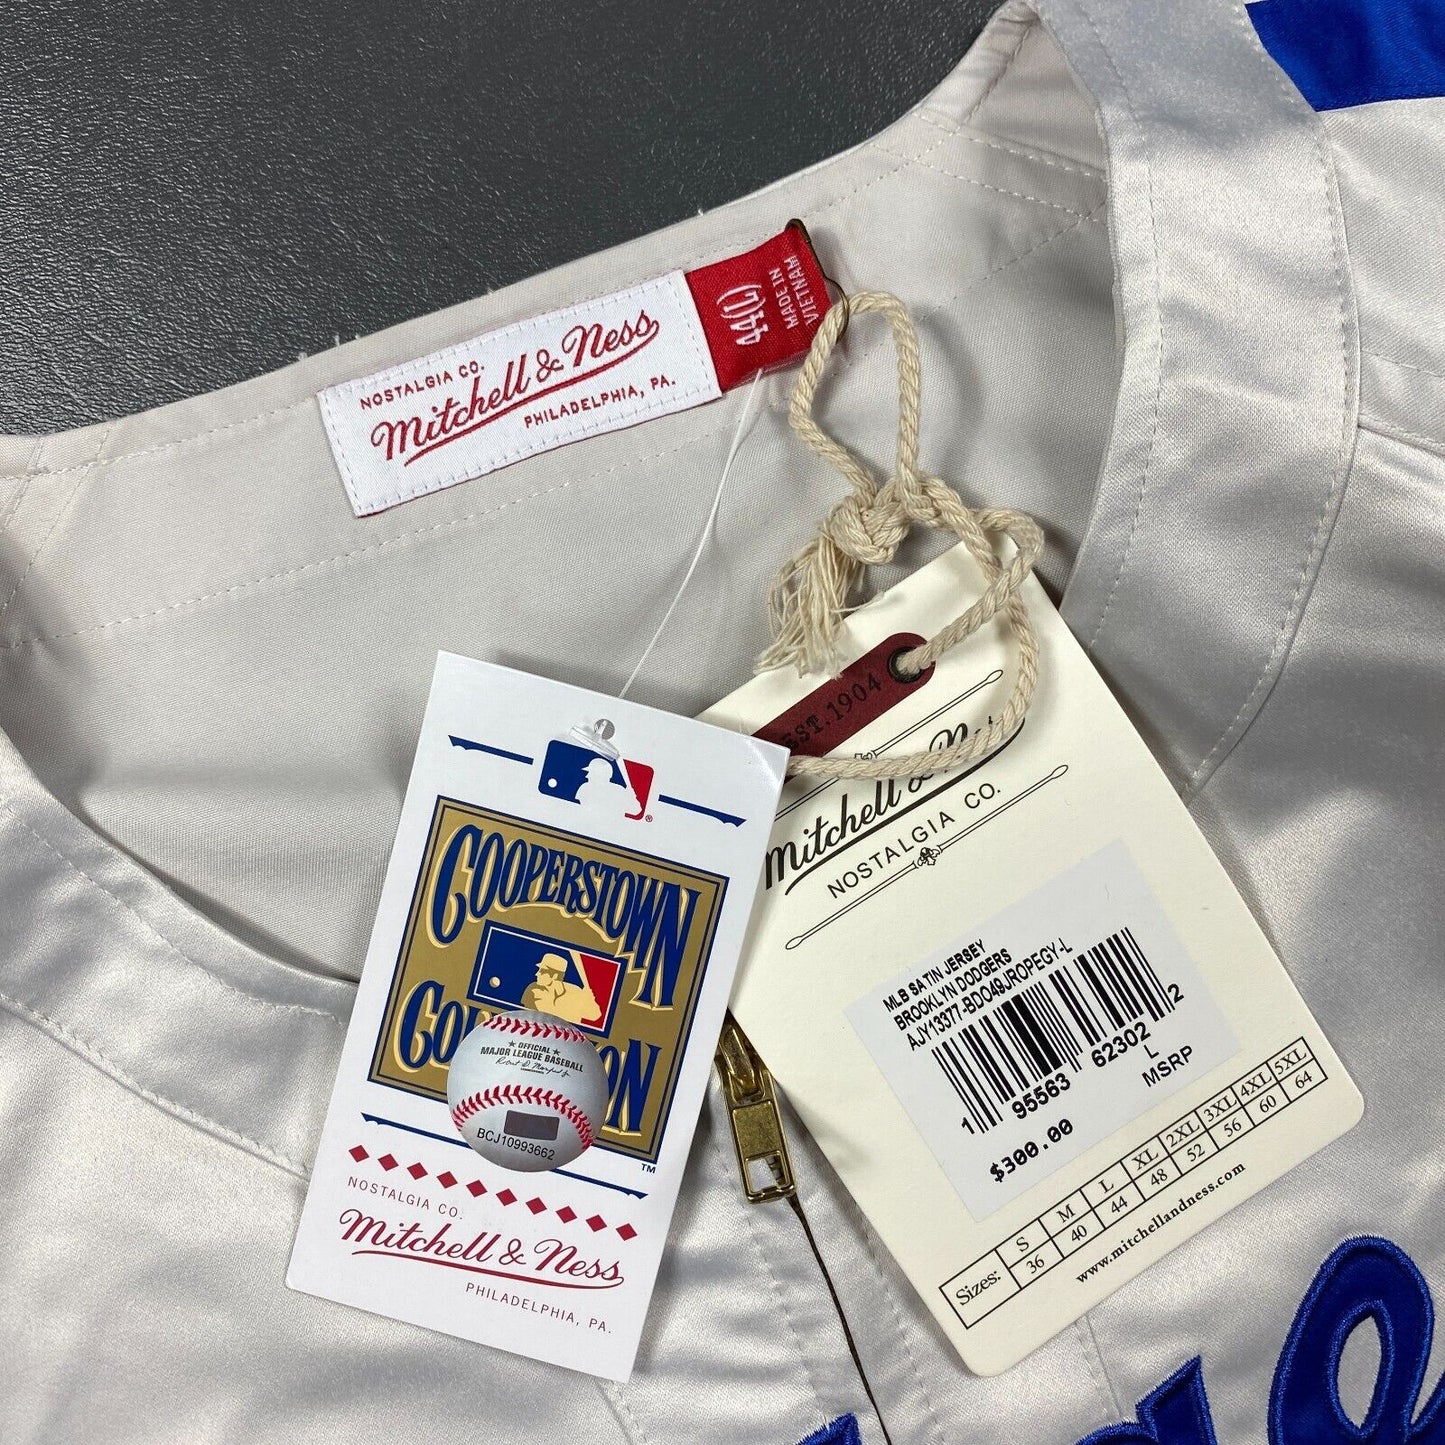 100% Authentic Jackie Robinson Mitchell Ness 1949 Dodgers Jersey Size 44 L Mens